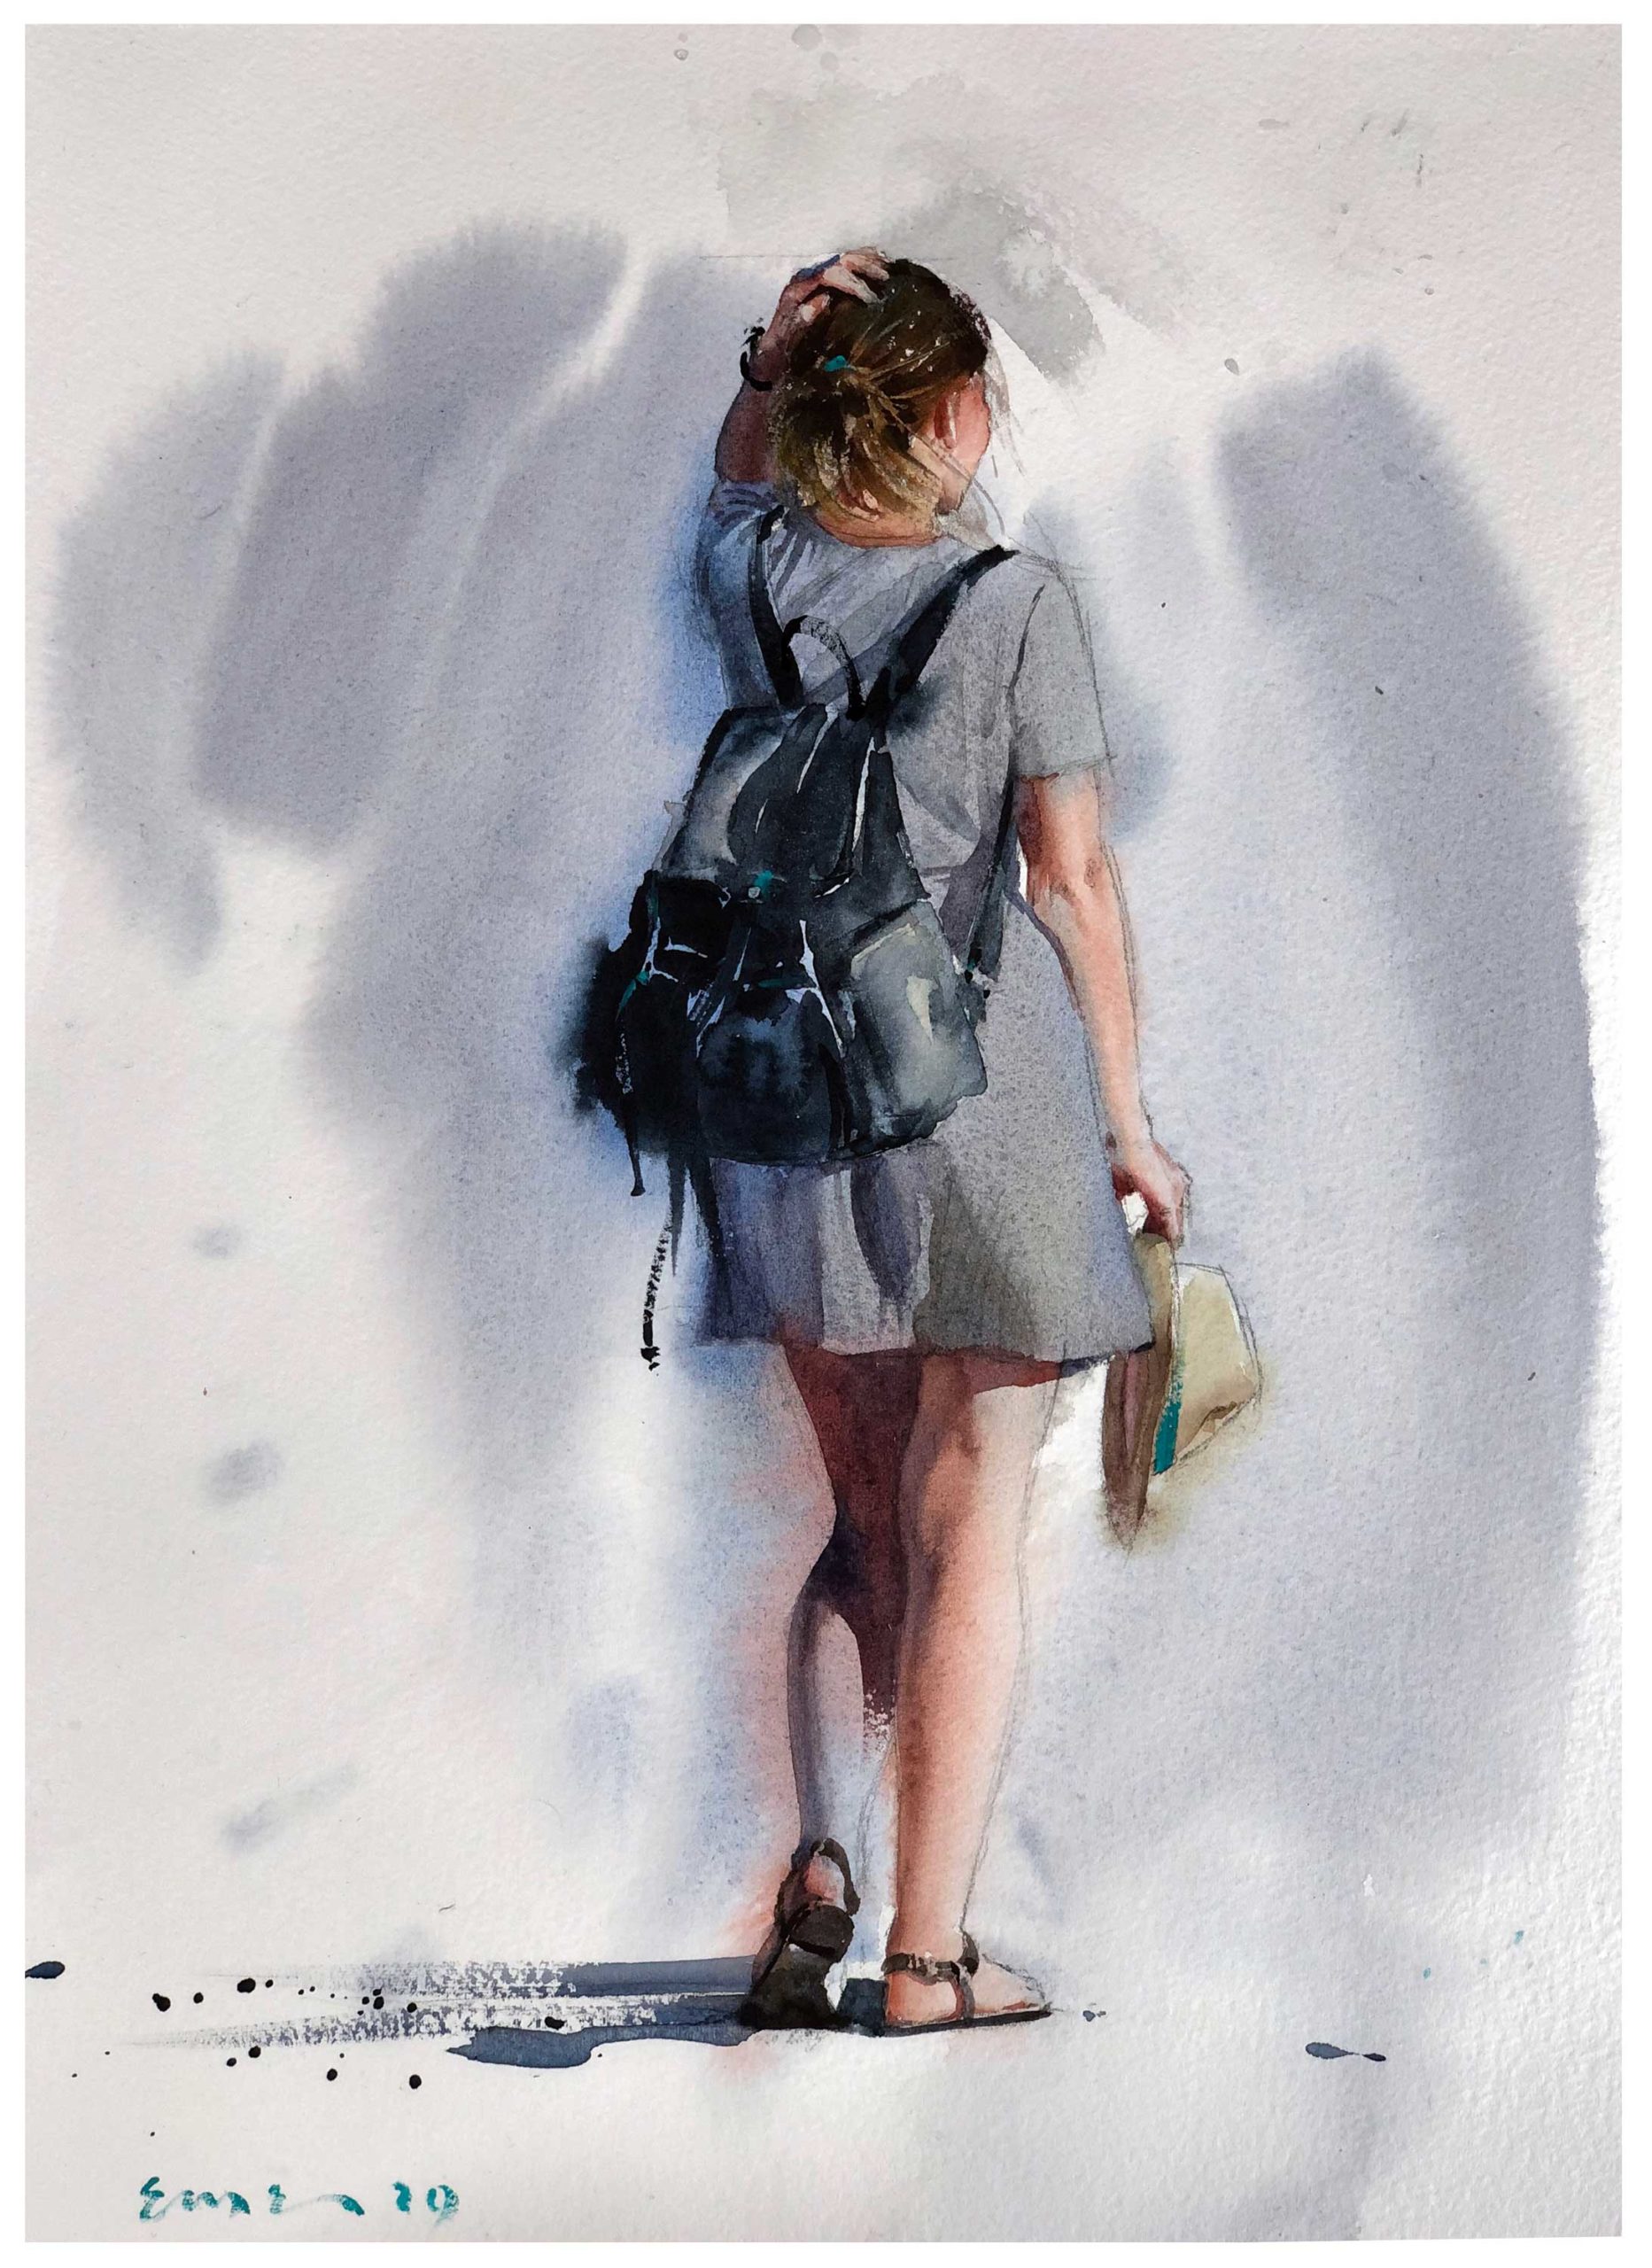 Watercolor painting of a woman